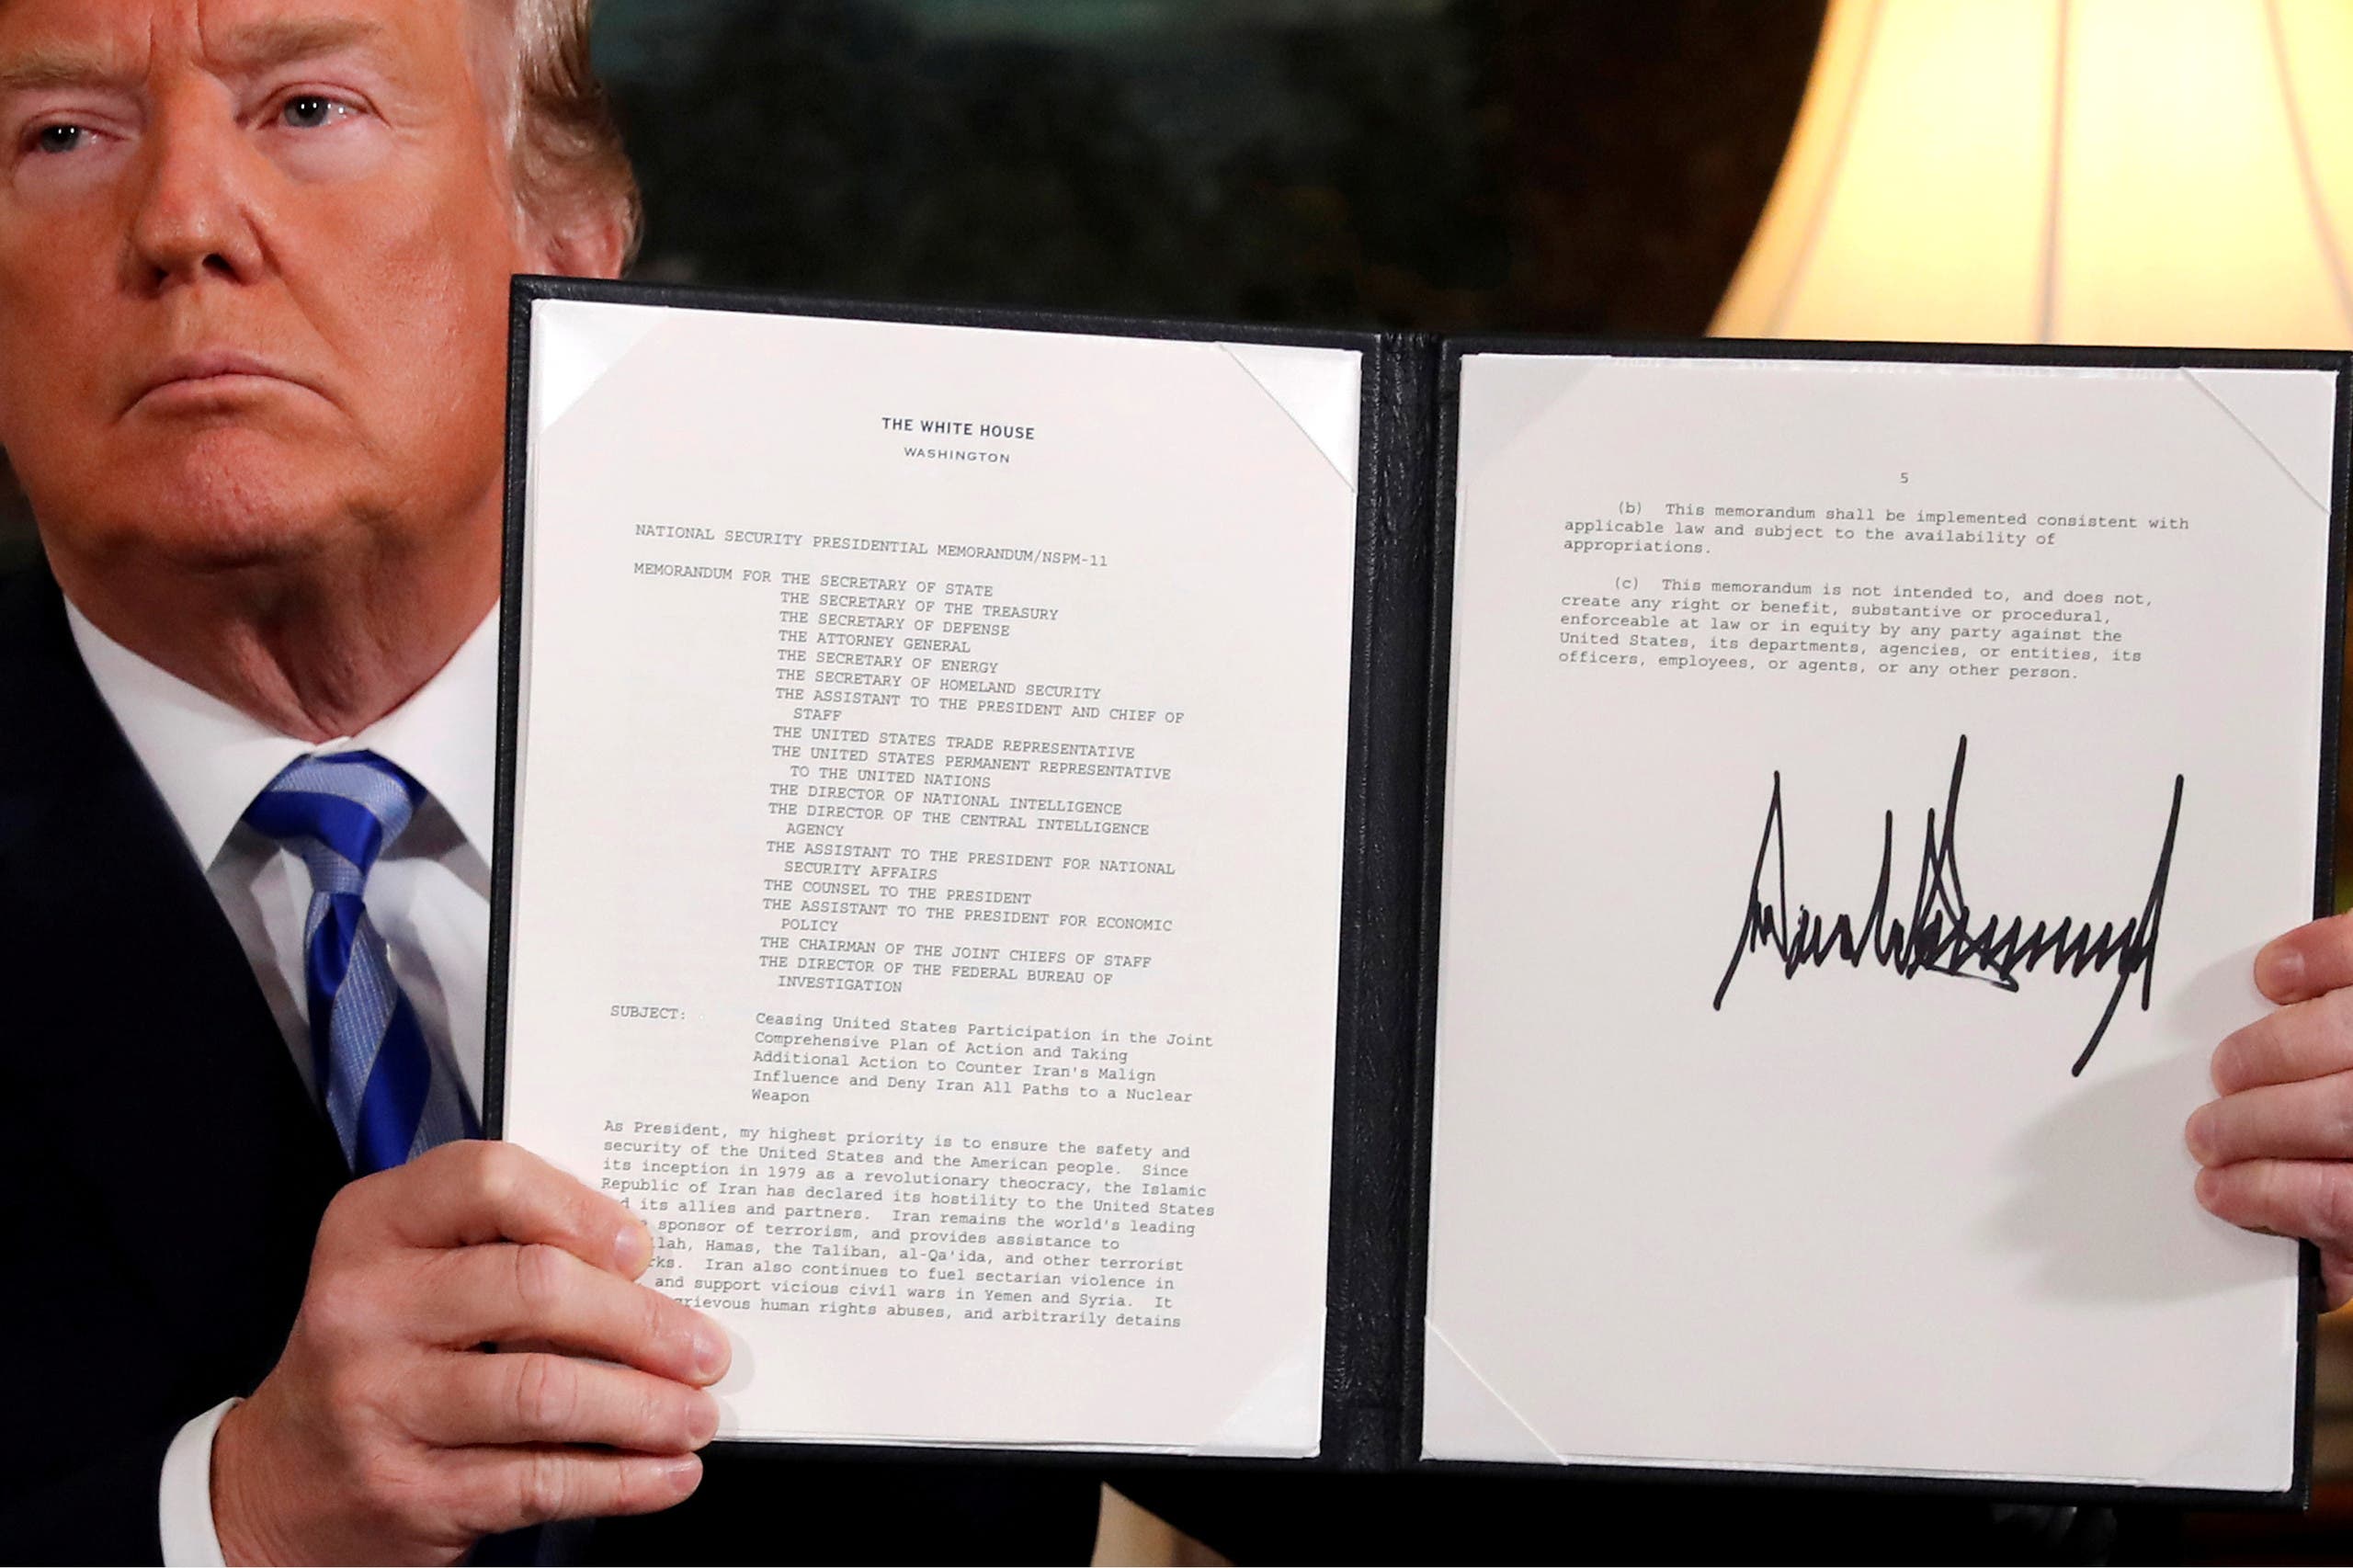 Former US President Donald Trump holds up a proclamation declaring his intention to withdraw from the JCPOA Iran nuclear agreement after signing it in the Diplomatic Room at the White House in Washington, US May 8, 2018. (File photo: Reuters)